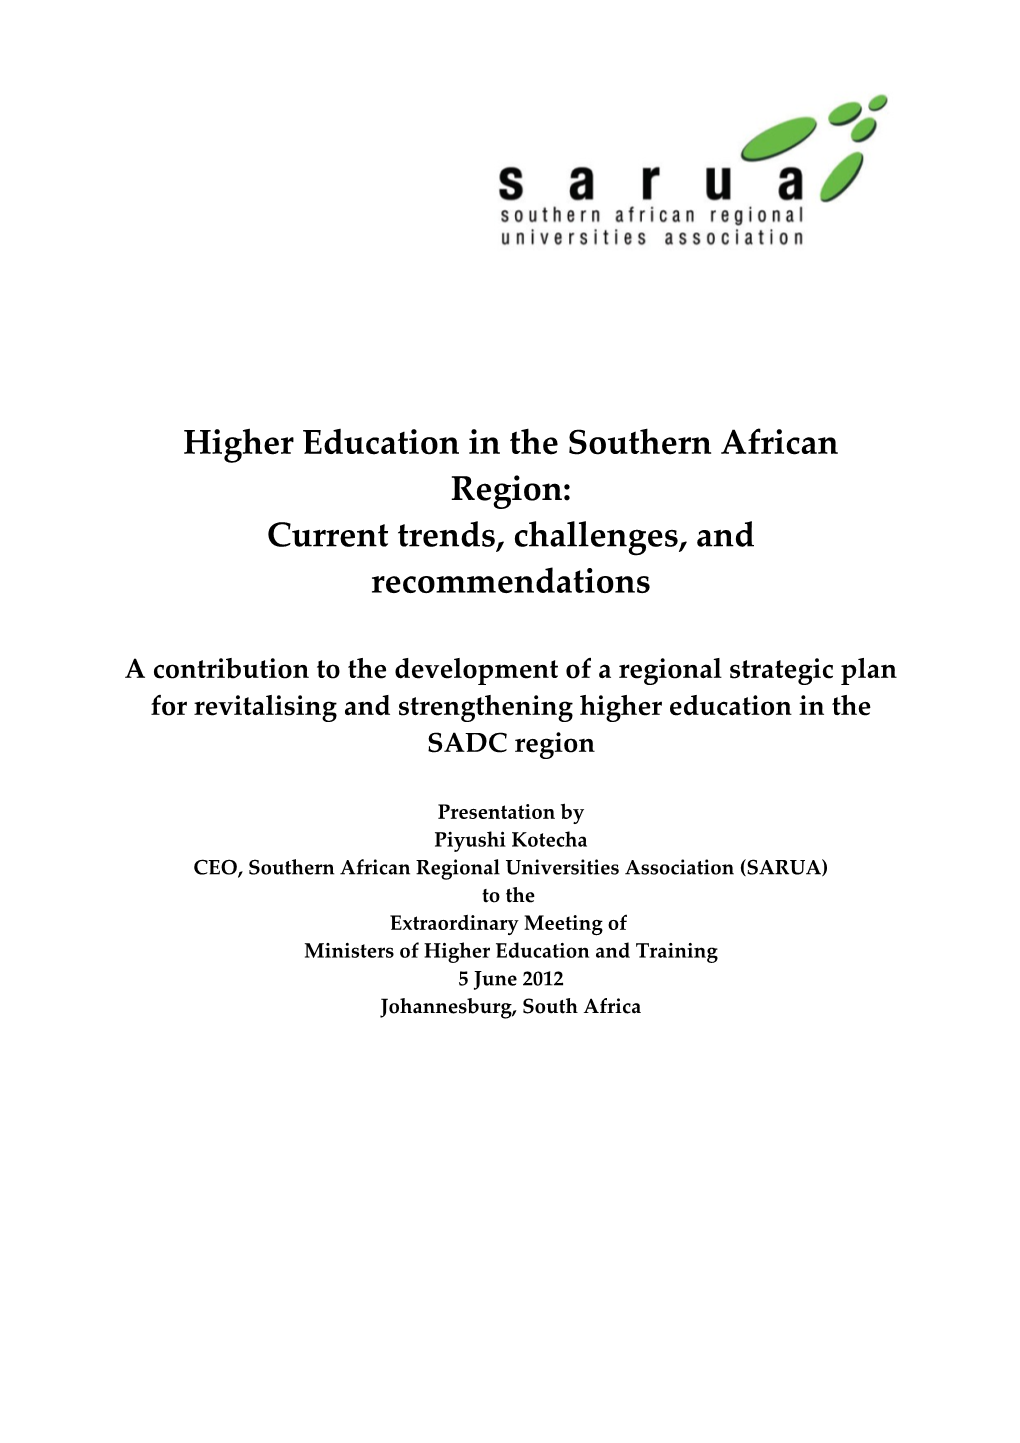 Higher Education in the Southern African Region